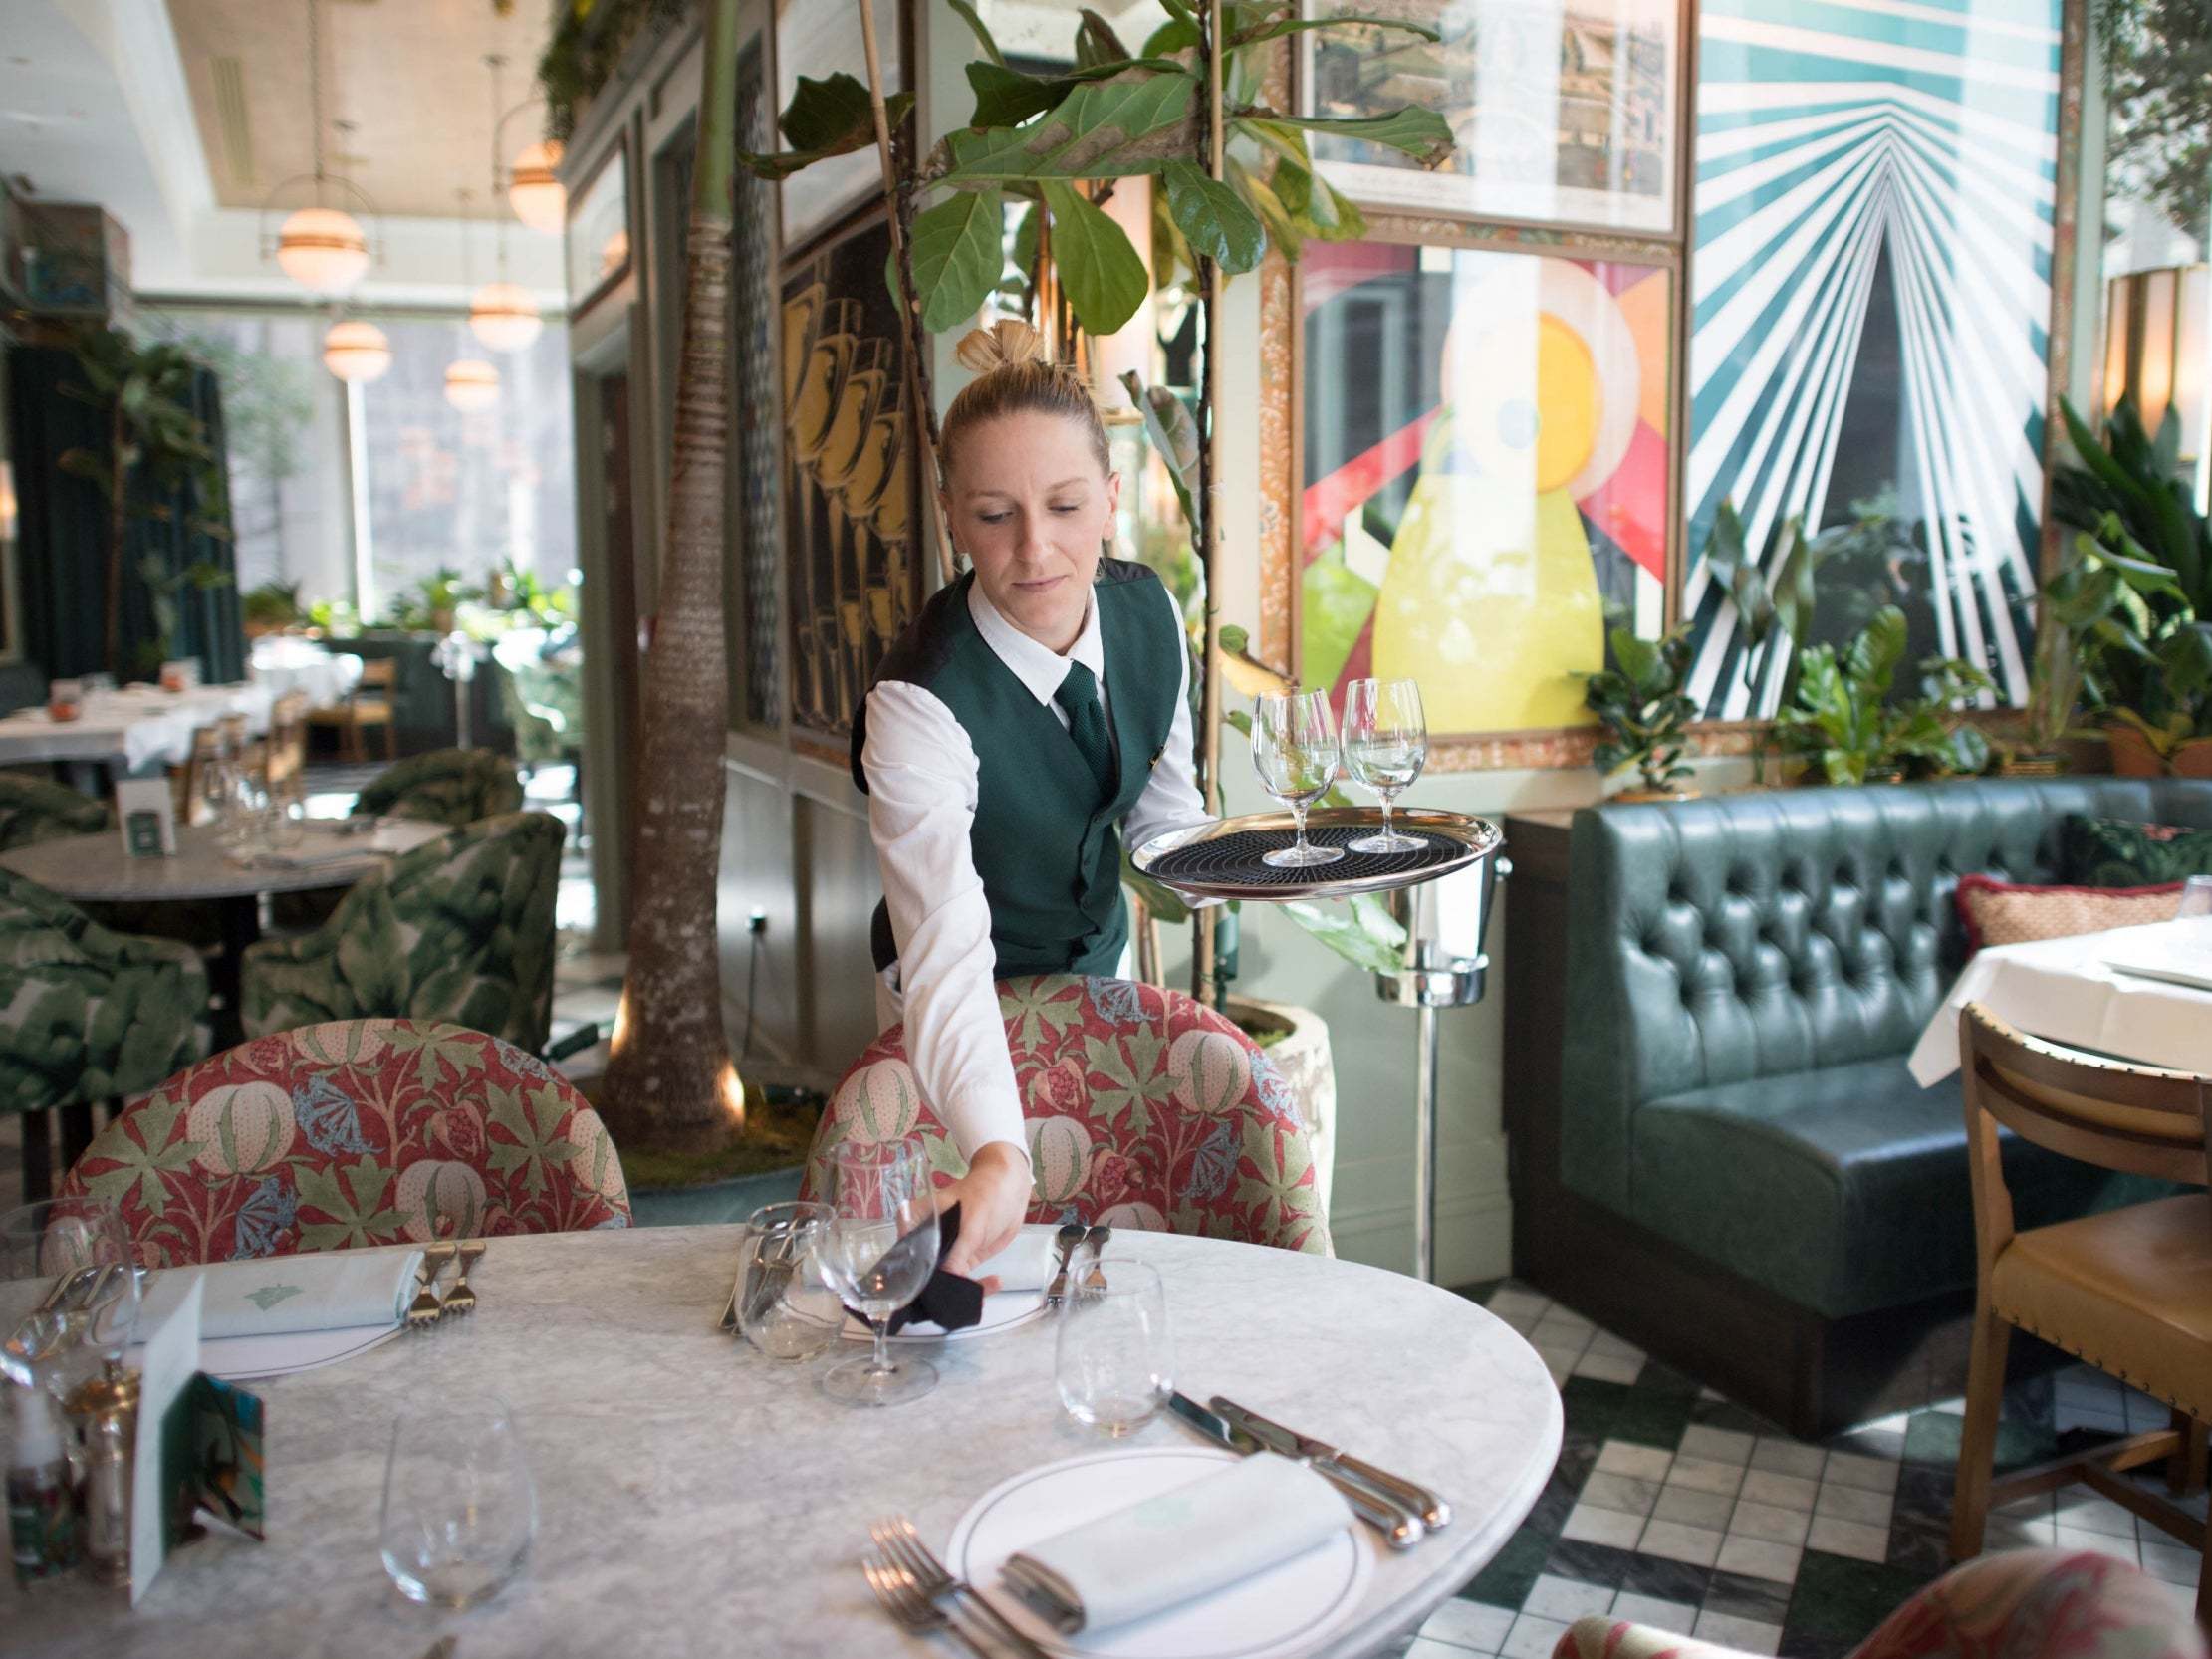 Staff at the Ivy Victoria in London, prepare the dining area, as the government initiative Eat Out to Help Out comes to an end